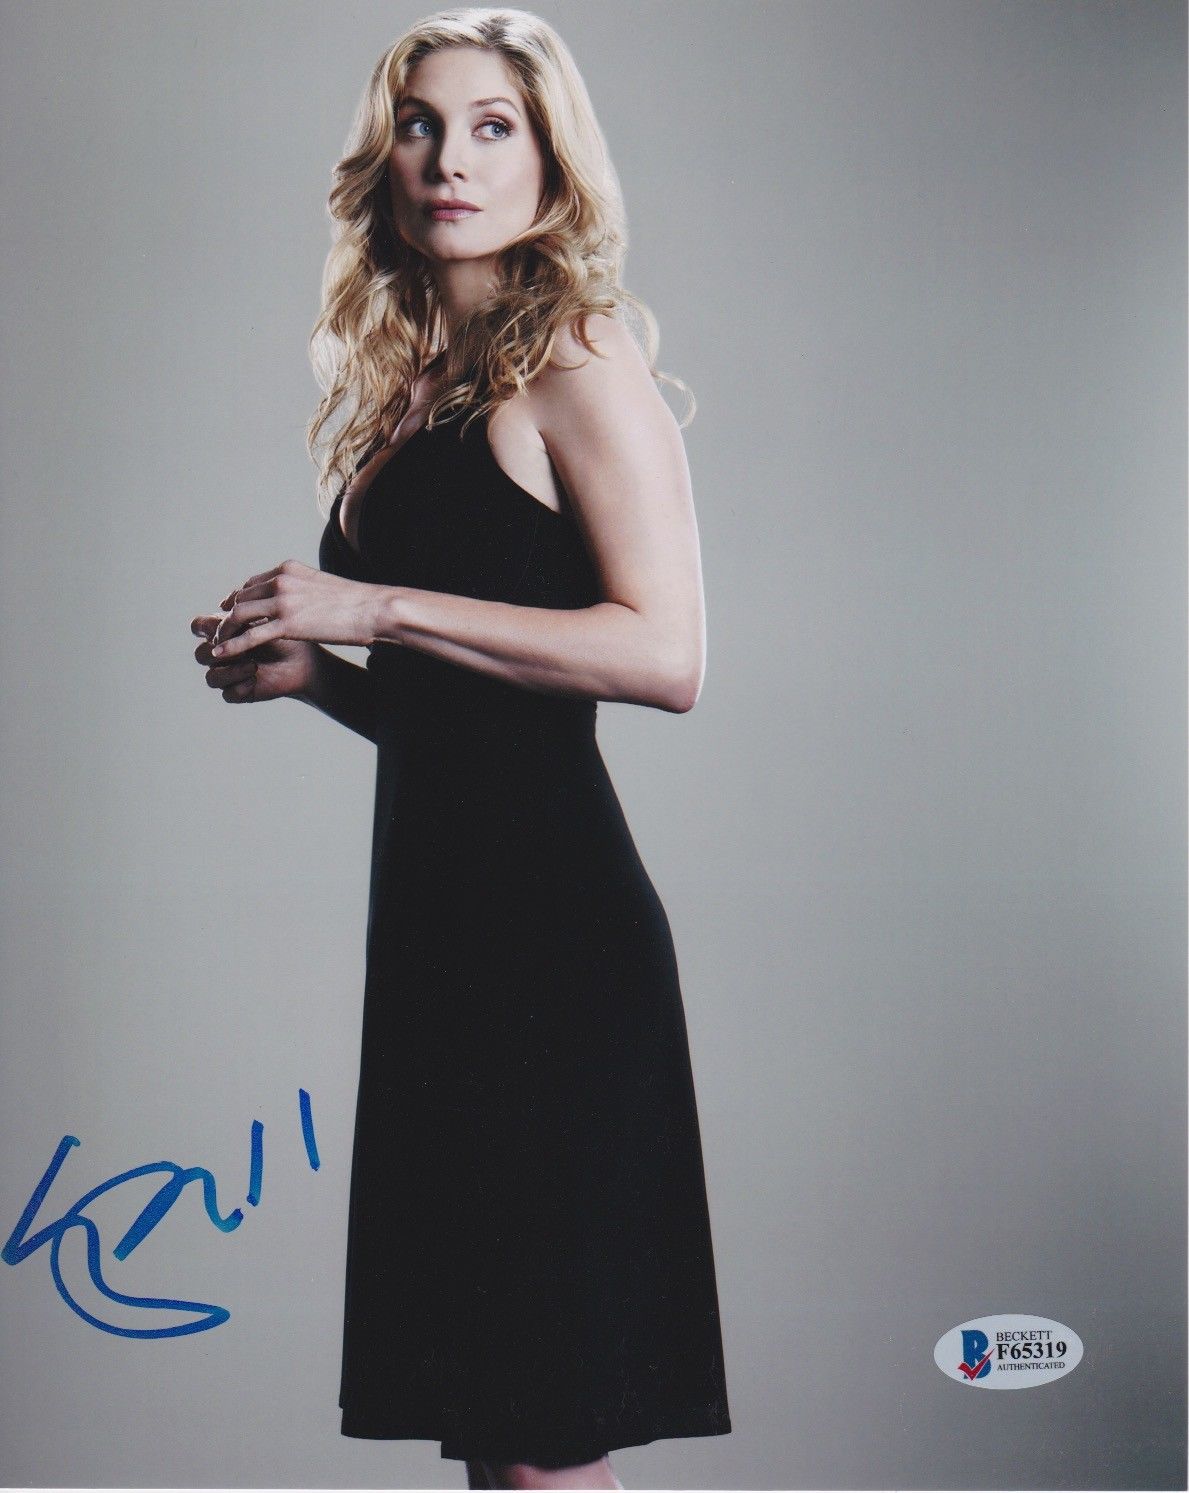 Elizabeth Mitchell Autographs For Sale by RACC Trusted Sellers | Real Autograph ...1189 x 1493